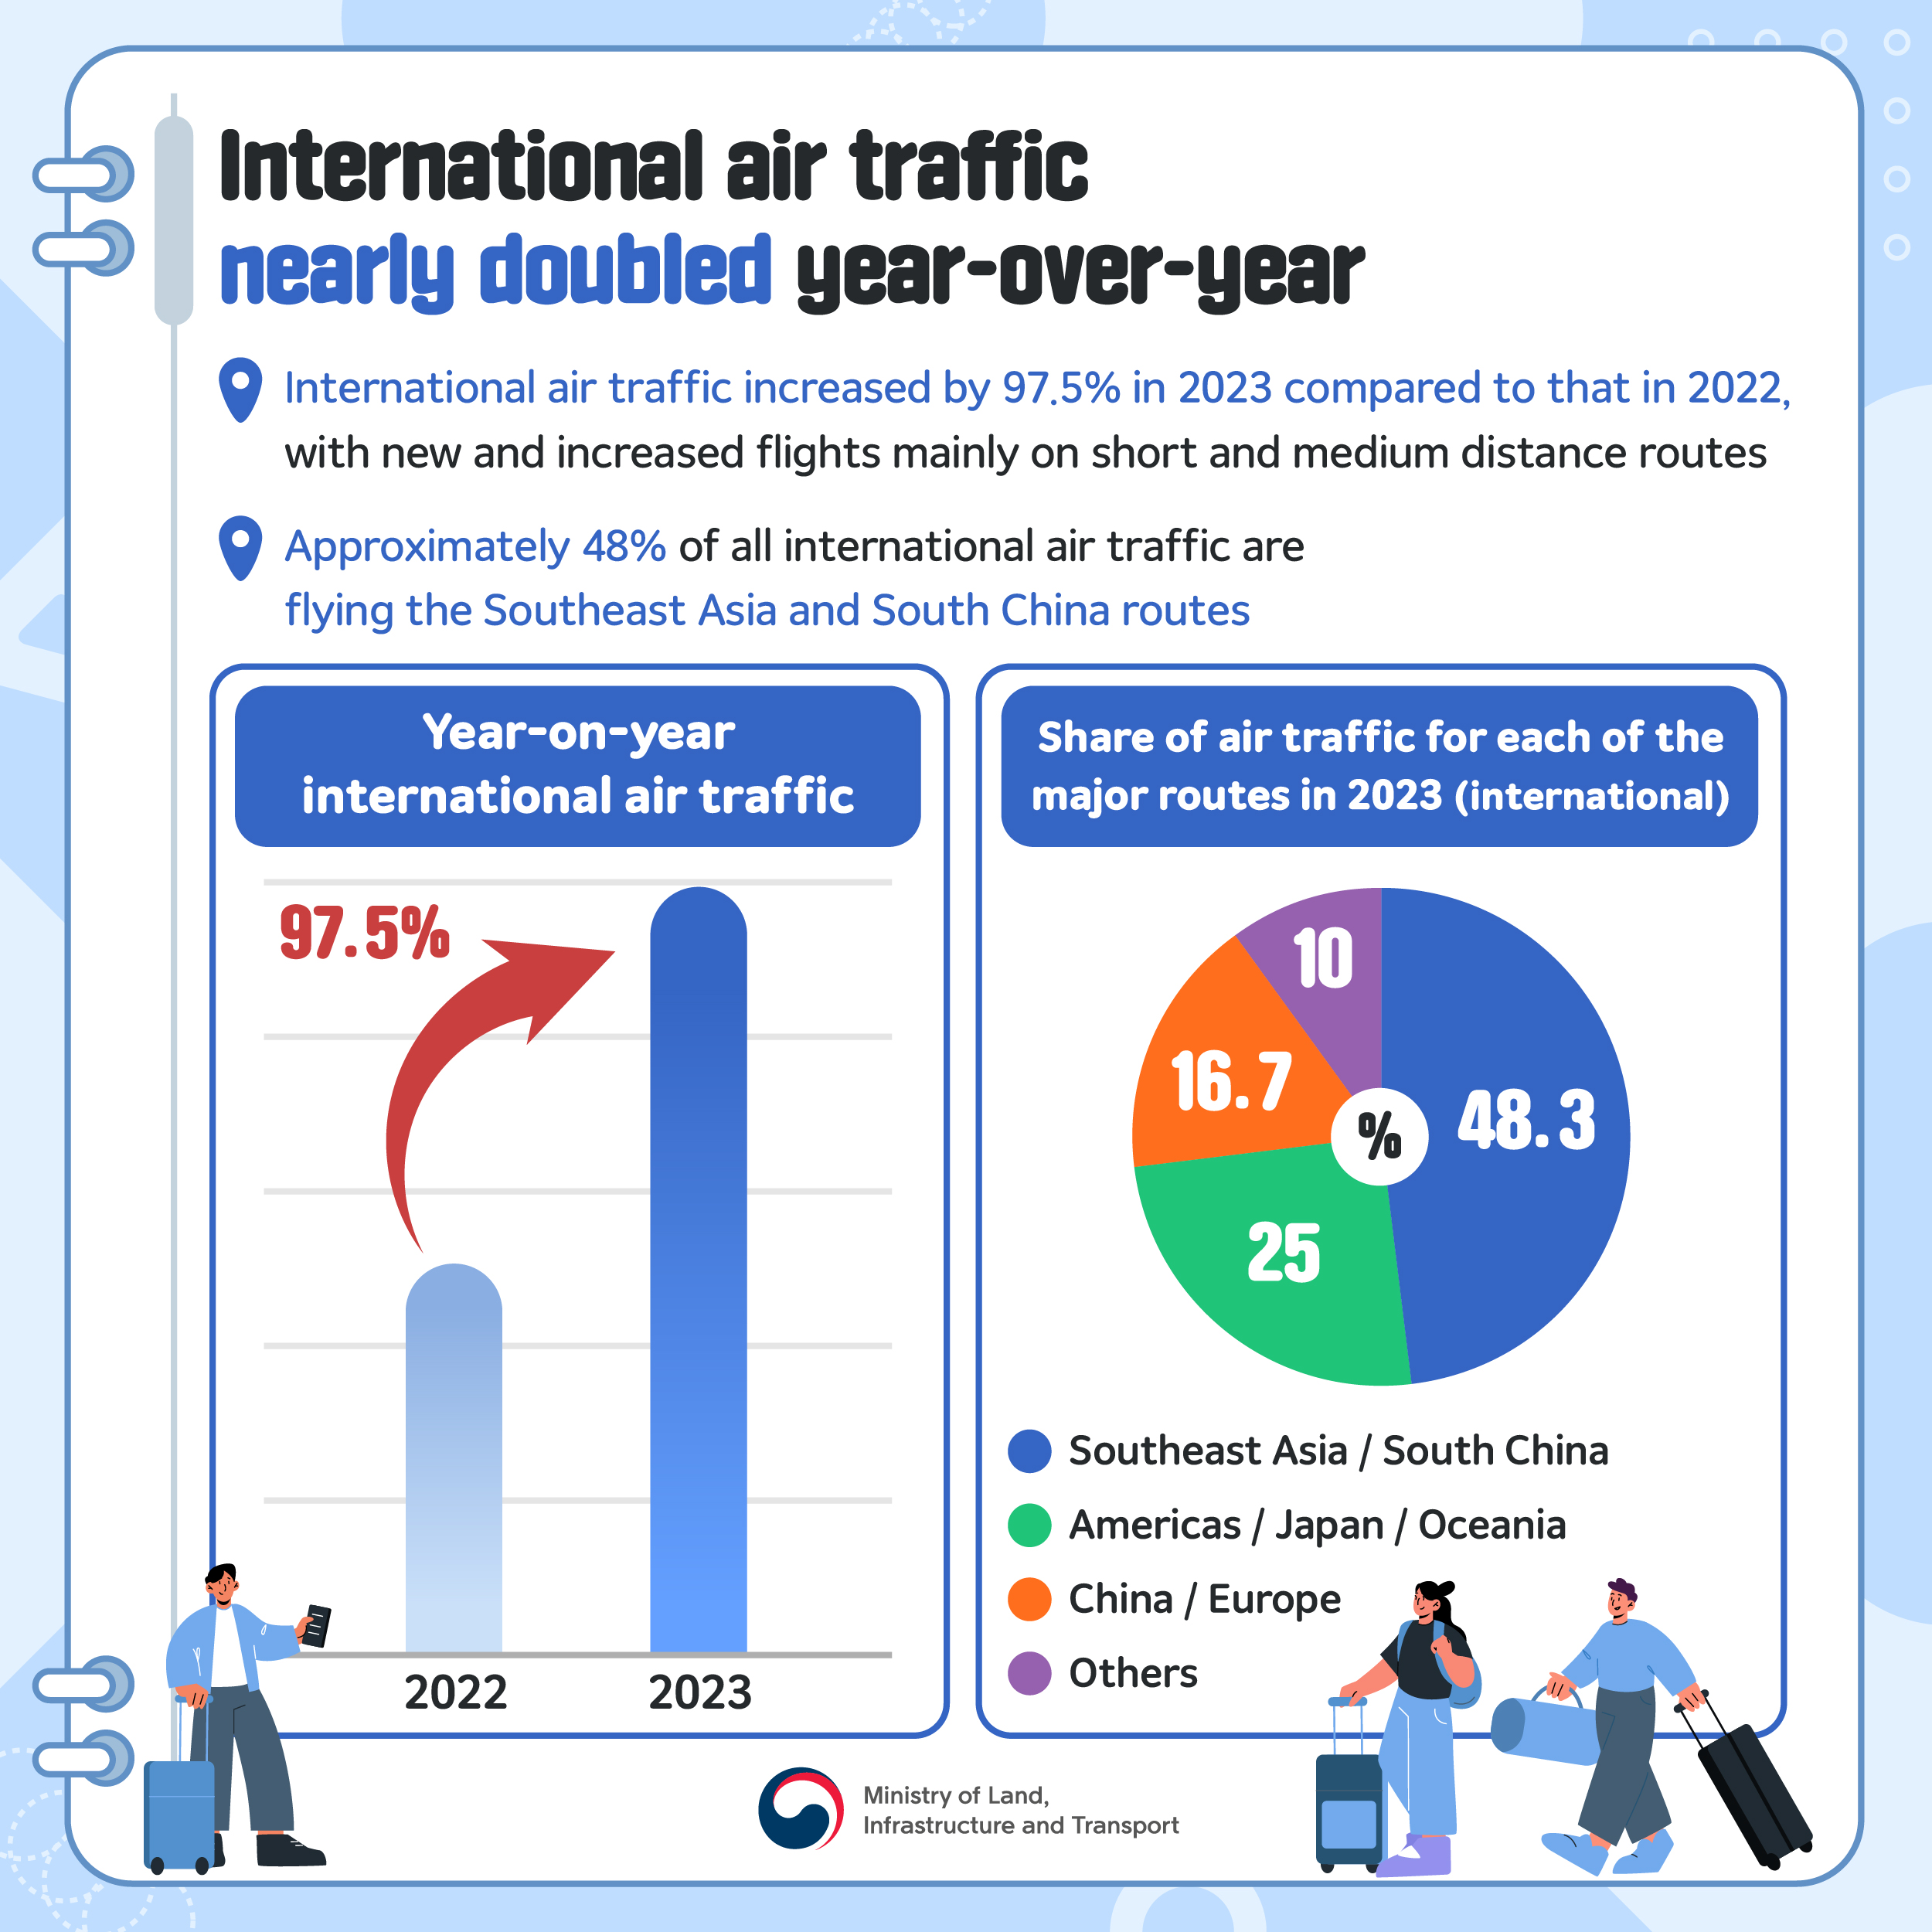 pic 4. International air traffic nearly doubled year-over-year - International air traffic increased by 97.5% in 2023 compared to that in 2022, with new and increased flights mainly on short and medium distance routes. Approximately 48% of all international air traffic are flying the Southeast Asia and South China routes